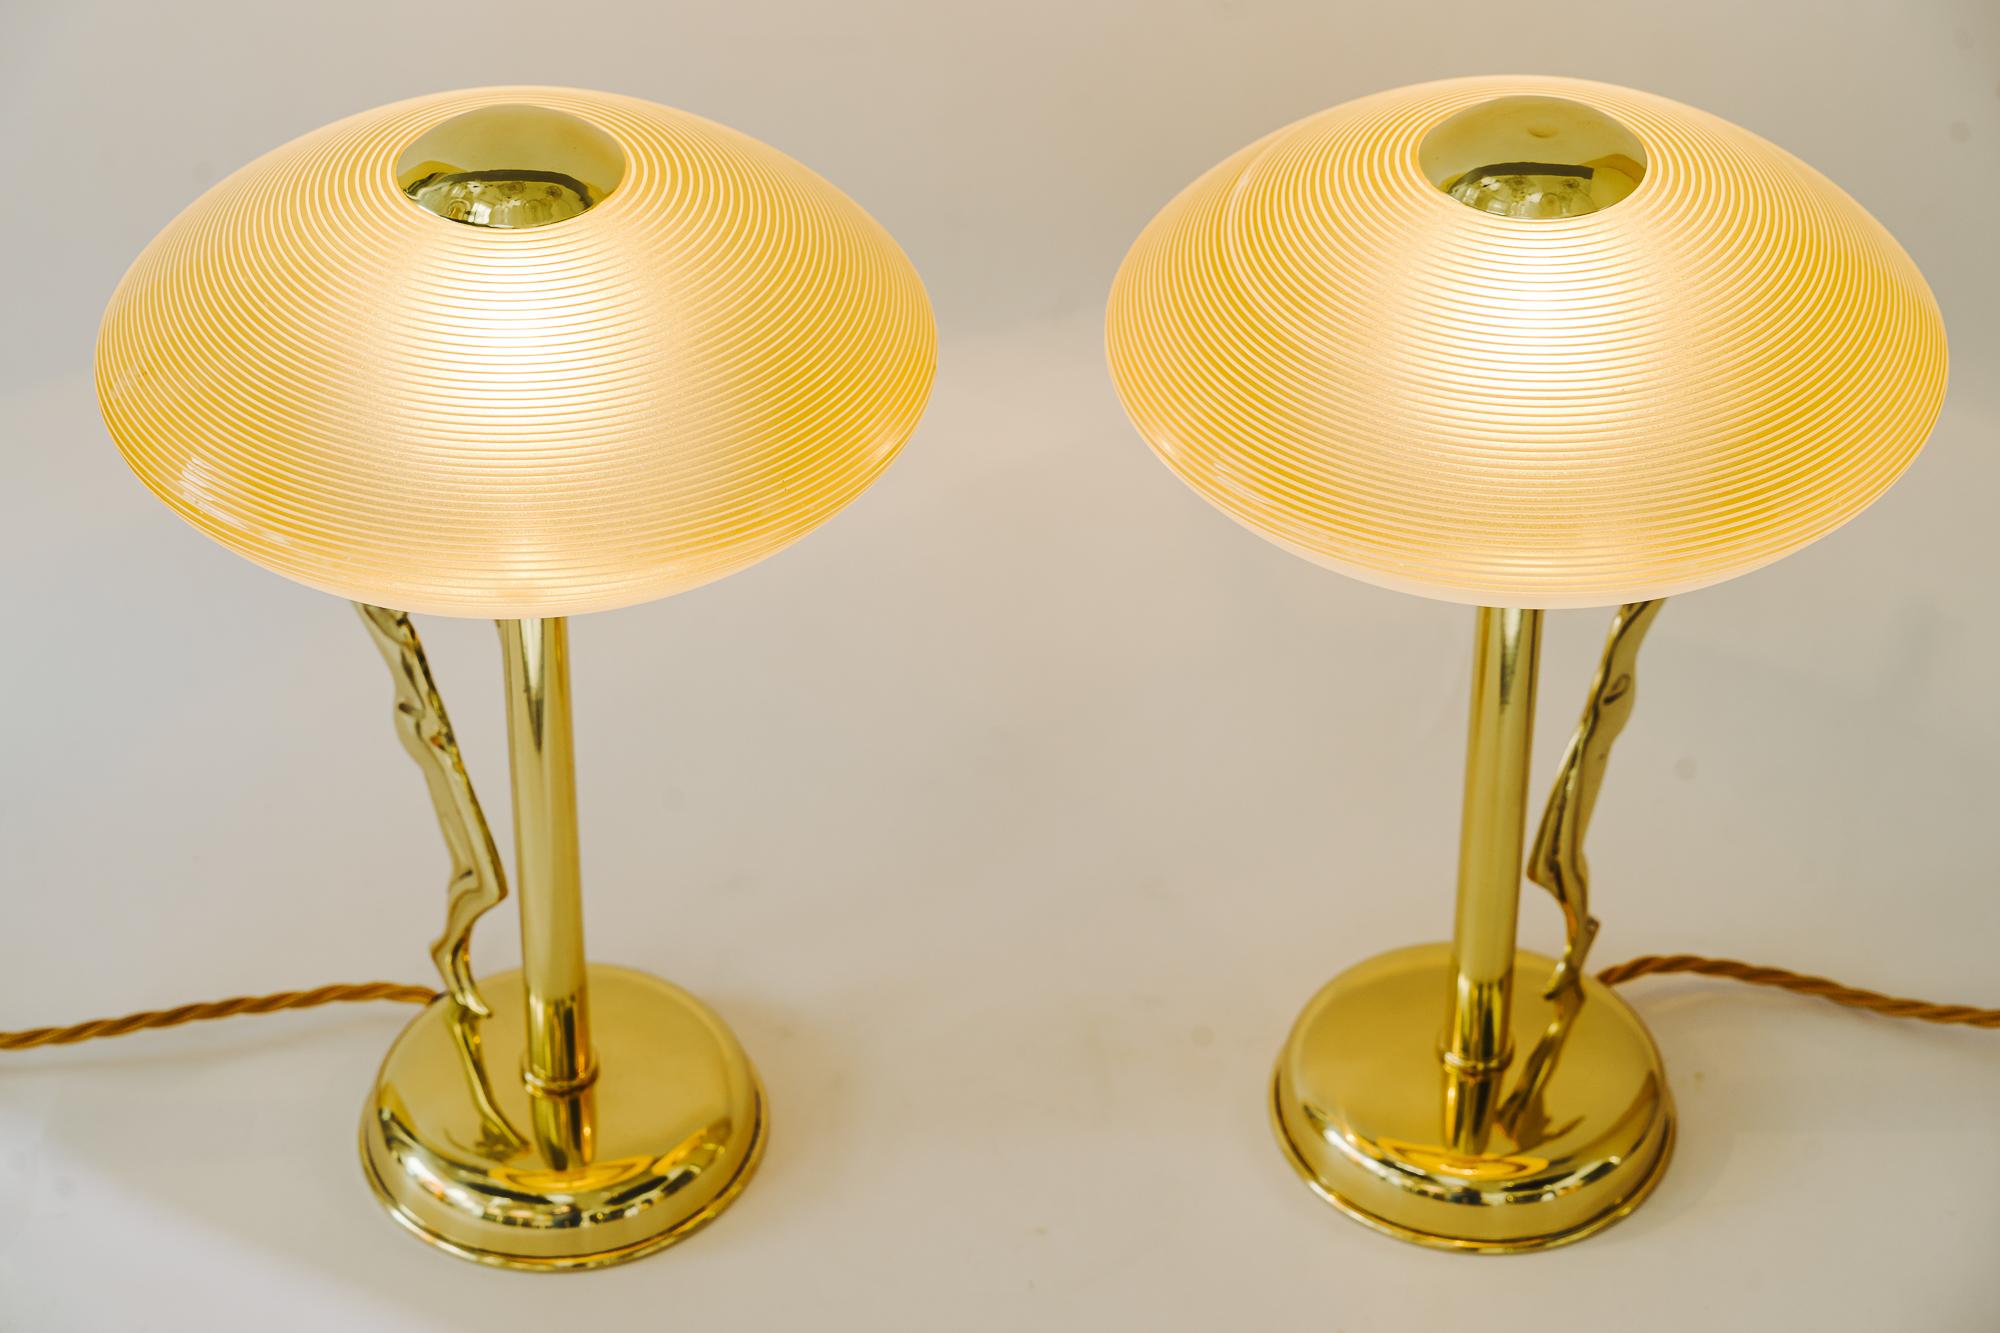 2 Art Deco Table Lamps with Original Glass Shades, circa 1920s, France For Sale 2